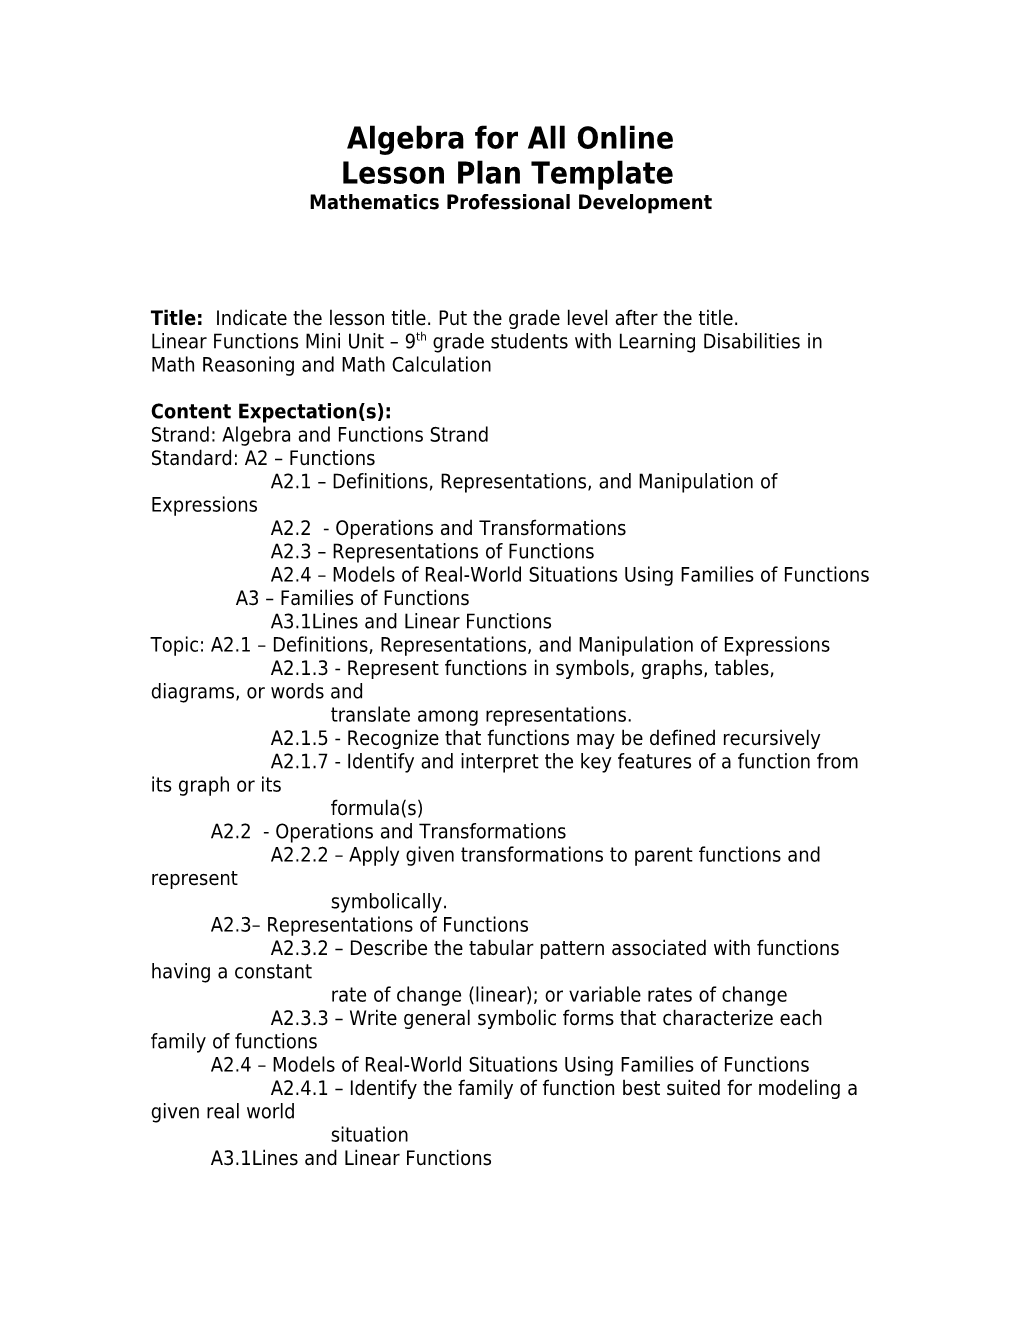 Lesson Plan Template s6